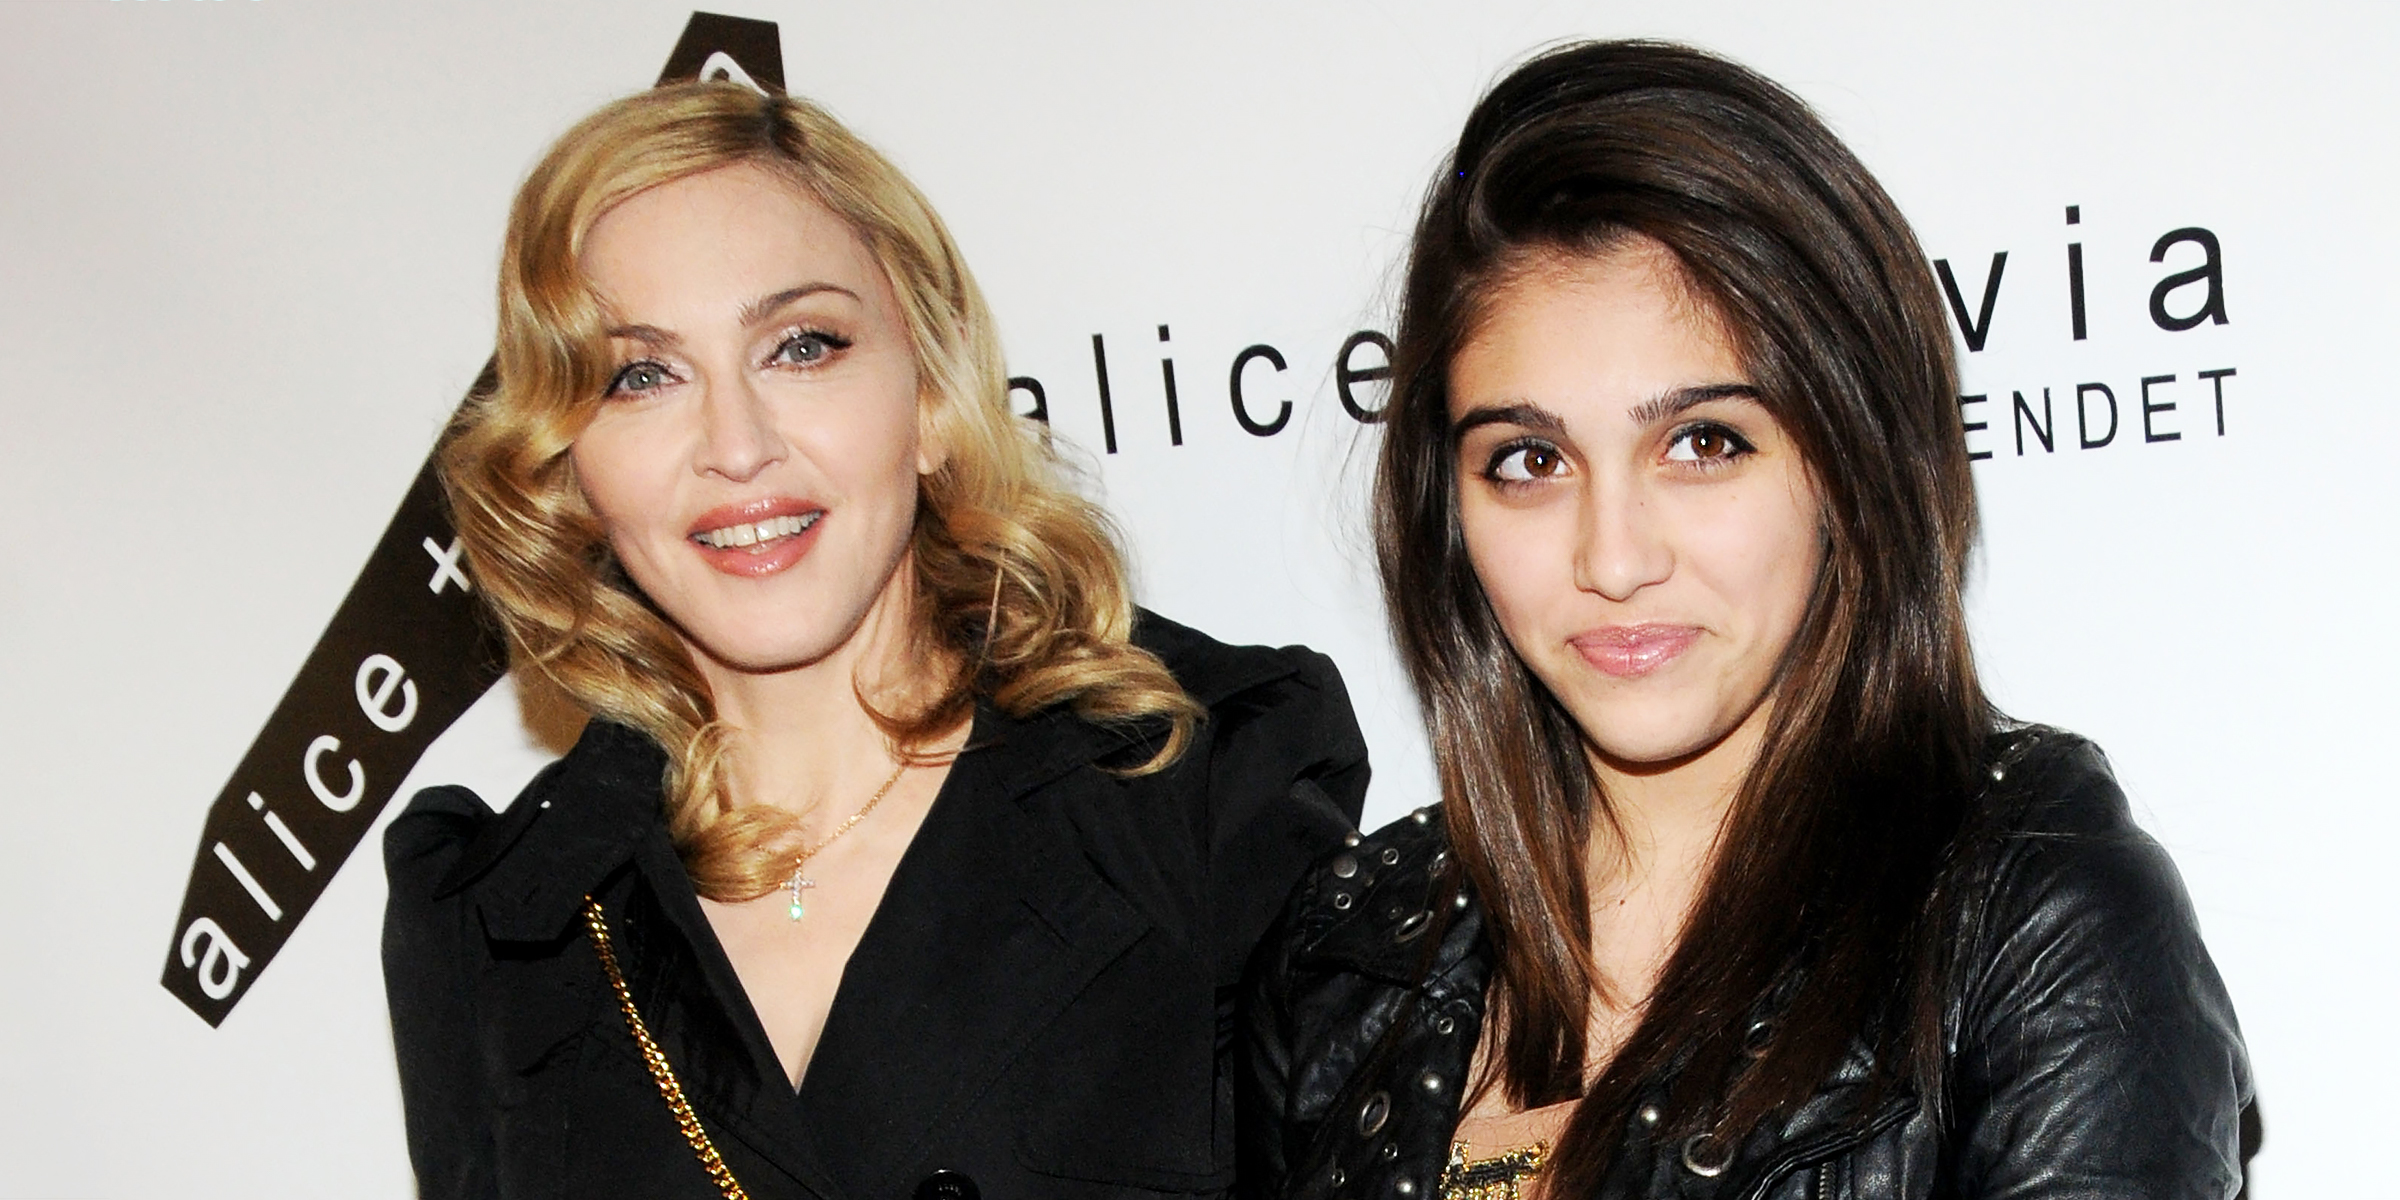 Madonna and Her Daughter Lourdes Leon | Source: Getty Images